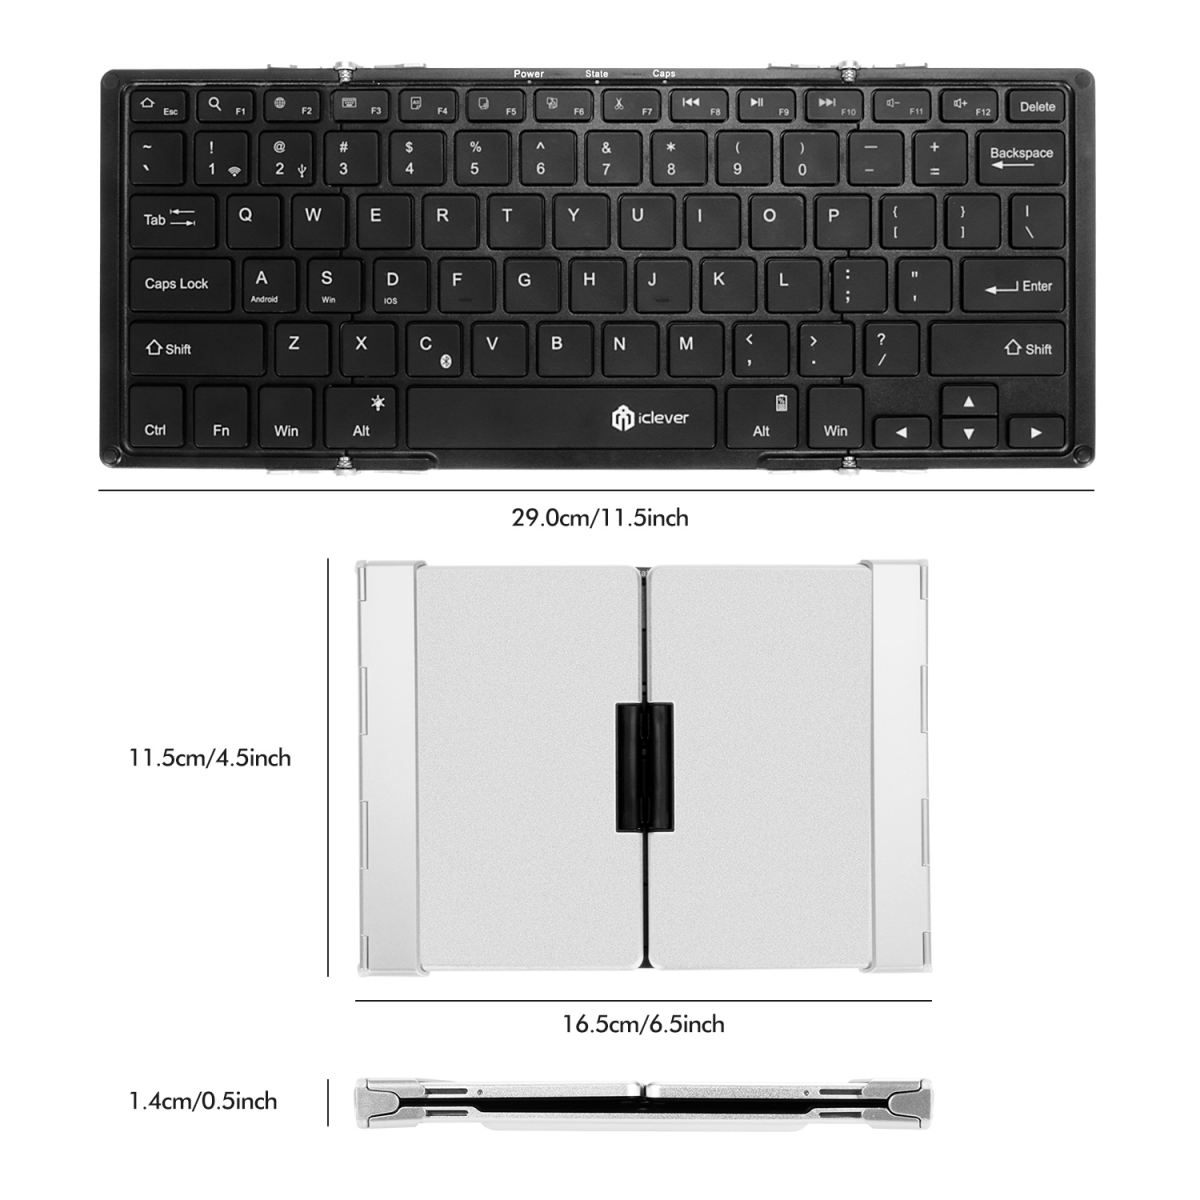 iClever Wireless Folding Keyboards Bluetooth Tablet Keyboard, Tri-folding Bluetooth Keyboard with Aluminum Alloy Base for Tablets, Smartphones, Laptops, PC [3-Color Back lights] - image 2 of 8